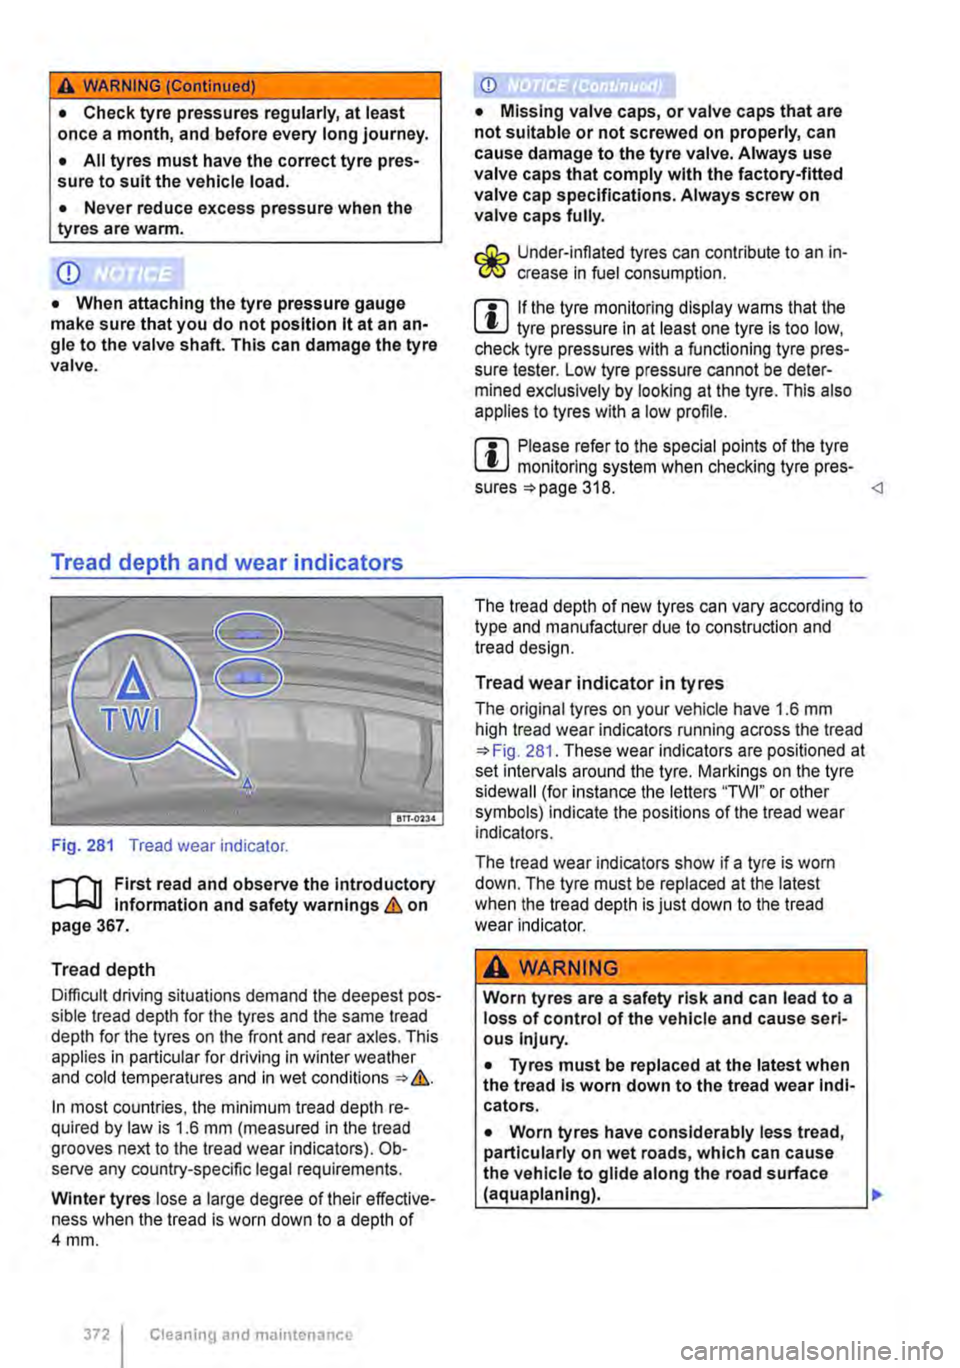 VOLKSWAGEN TRANSPORTER 2019 User Guide A WARNING (Continued) 
• Check tyre pressures regularly, at least once a month, and before every long journey. 
• All tyres must have the correct tyre pres-sure to suit the vehicle load. 
• Neve